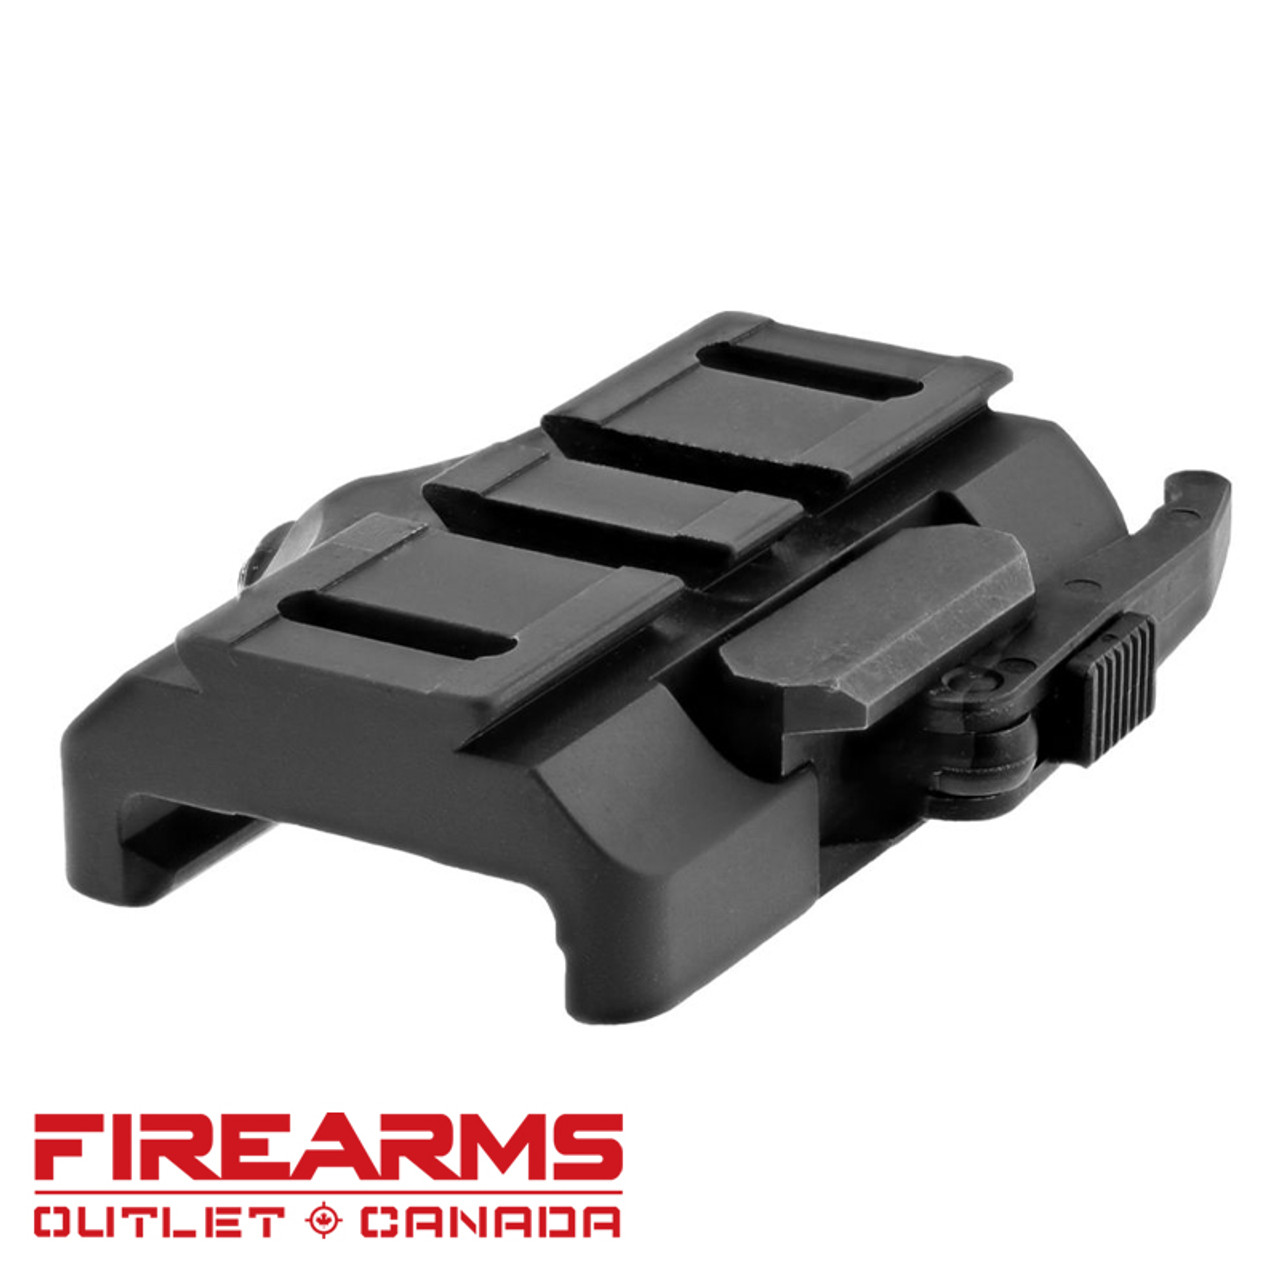 Aimpoint Acro Adapter Plate - AR15 Low QD Mount [200517]